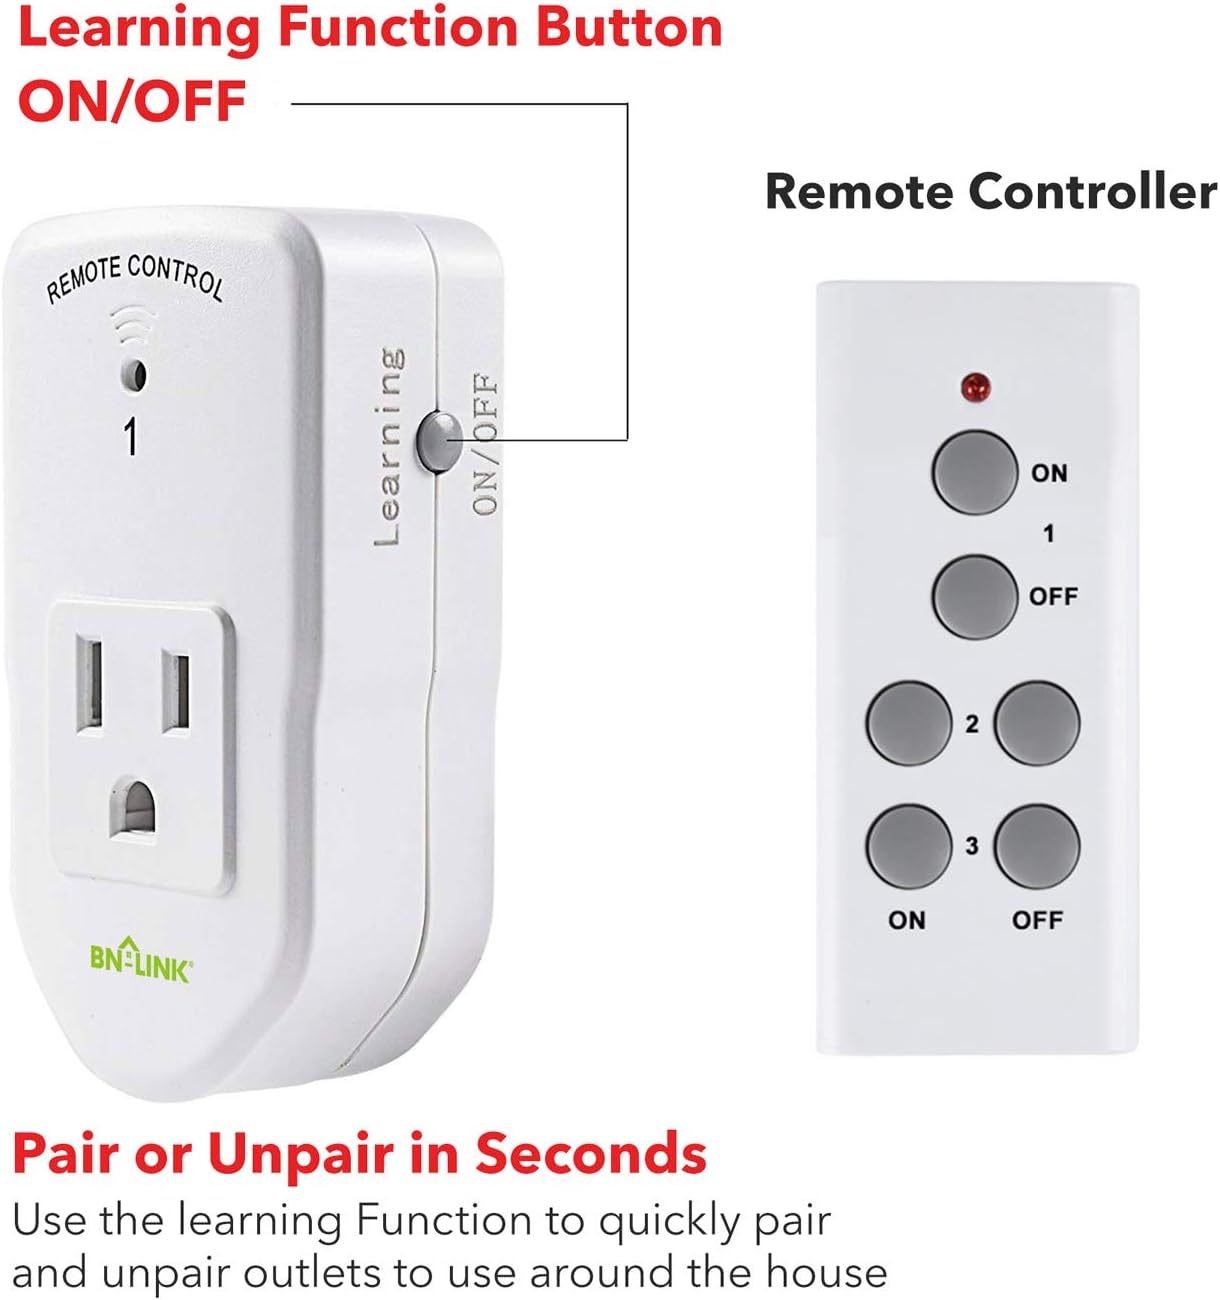 BN-LINK Wireless Remote Control Electrical Outlet Switch for Lights, Fans, Christmas Lights, Small Appliance, Long Range White (Learning Code, 3Rx-1Tx) 1200W/10A